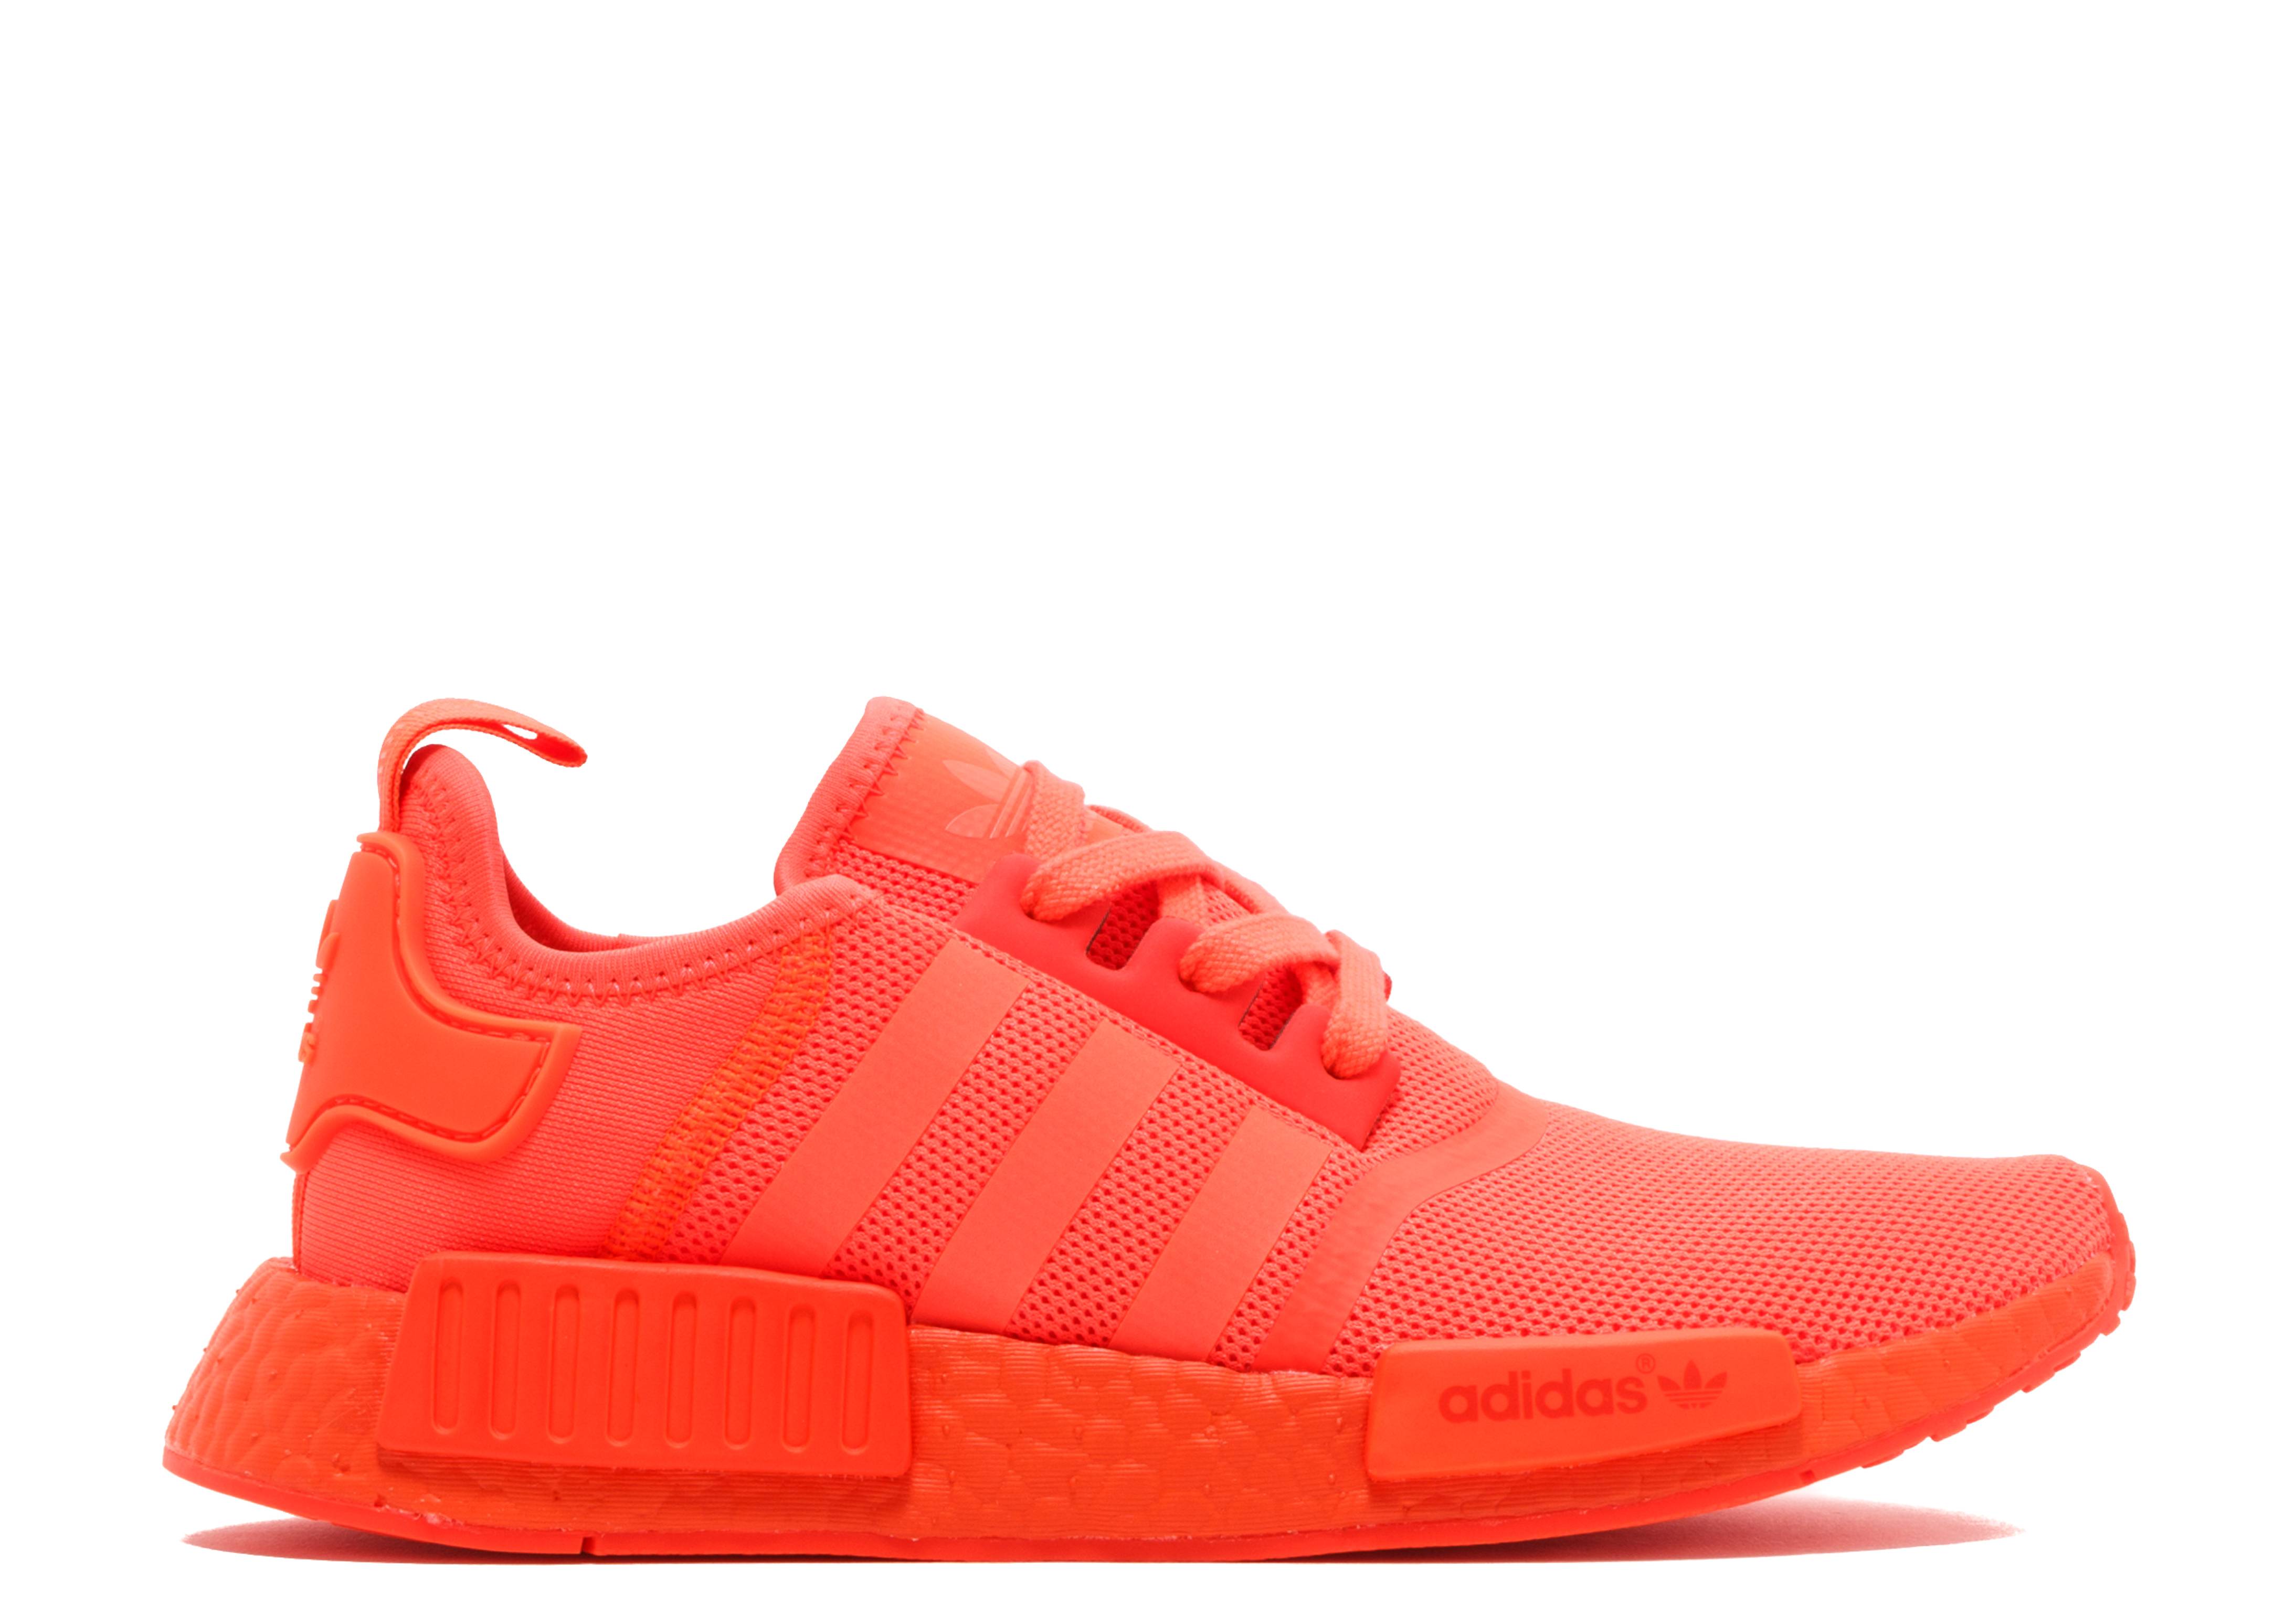 NMD_R1 'Solar Red'